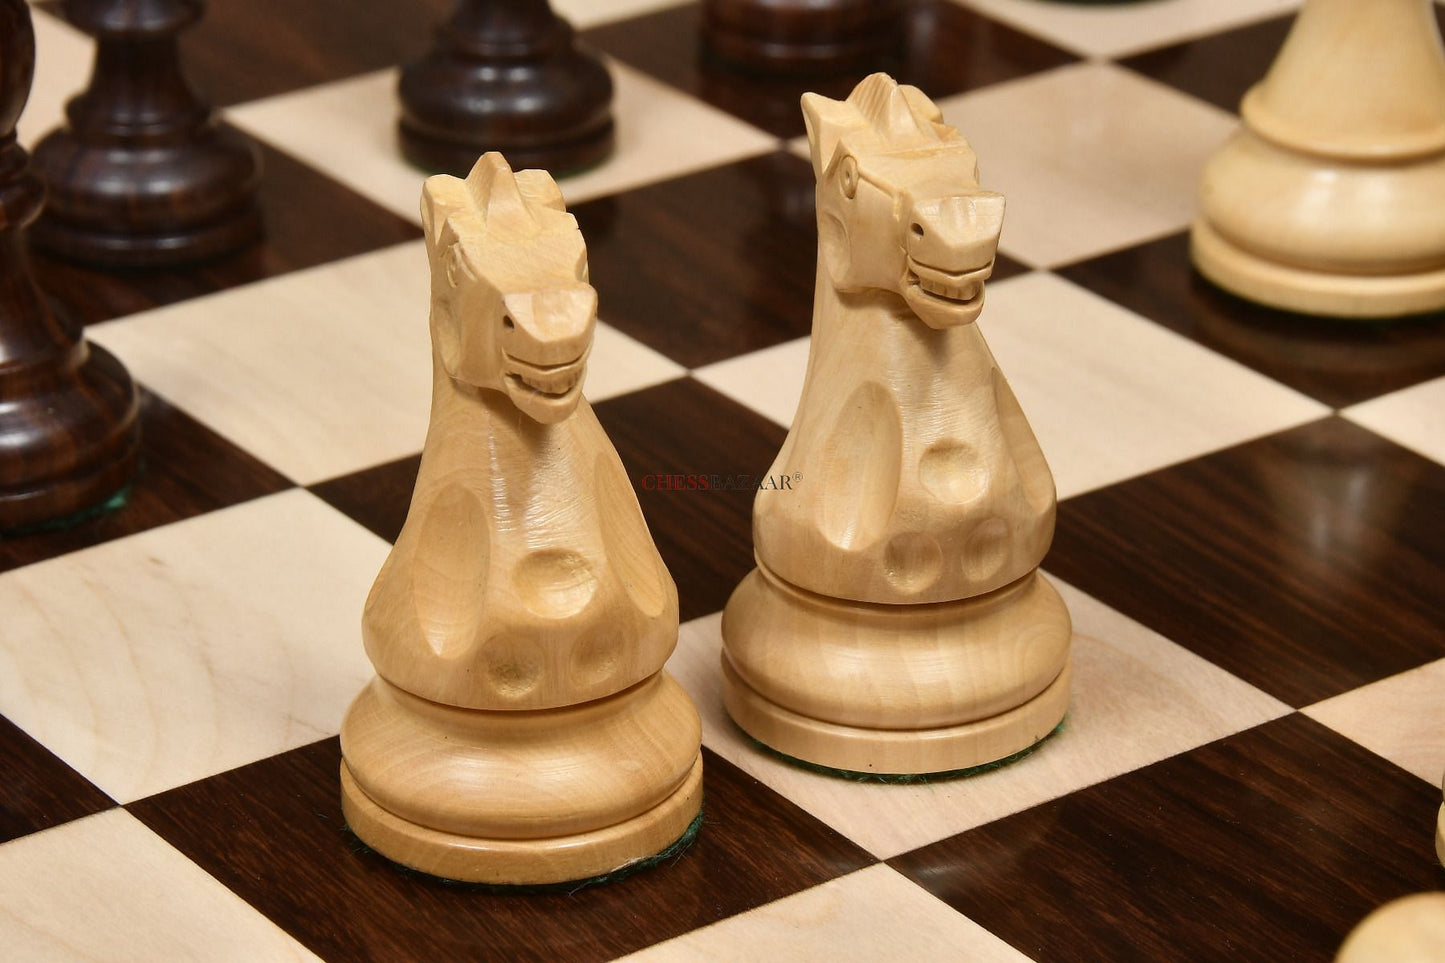 The American Staunton Series Weighted Tournament Chess Pieces in Rosewood & Box Wood - 4.1" King